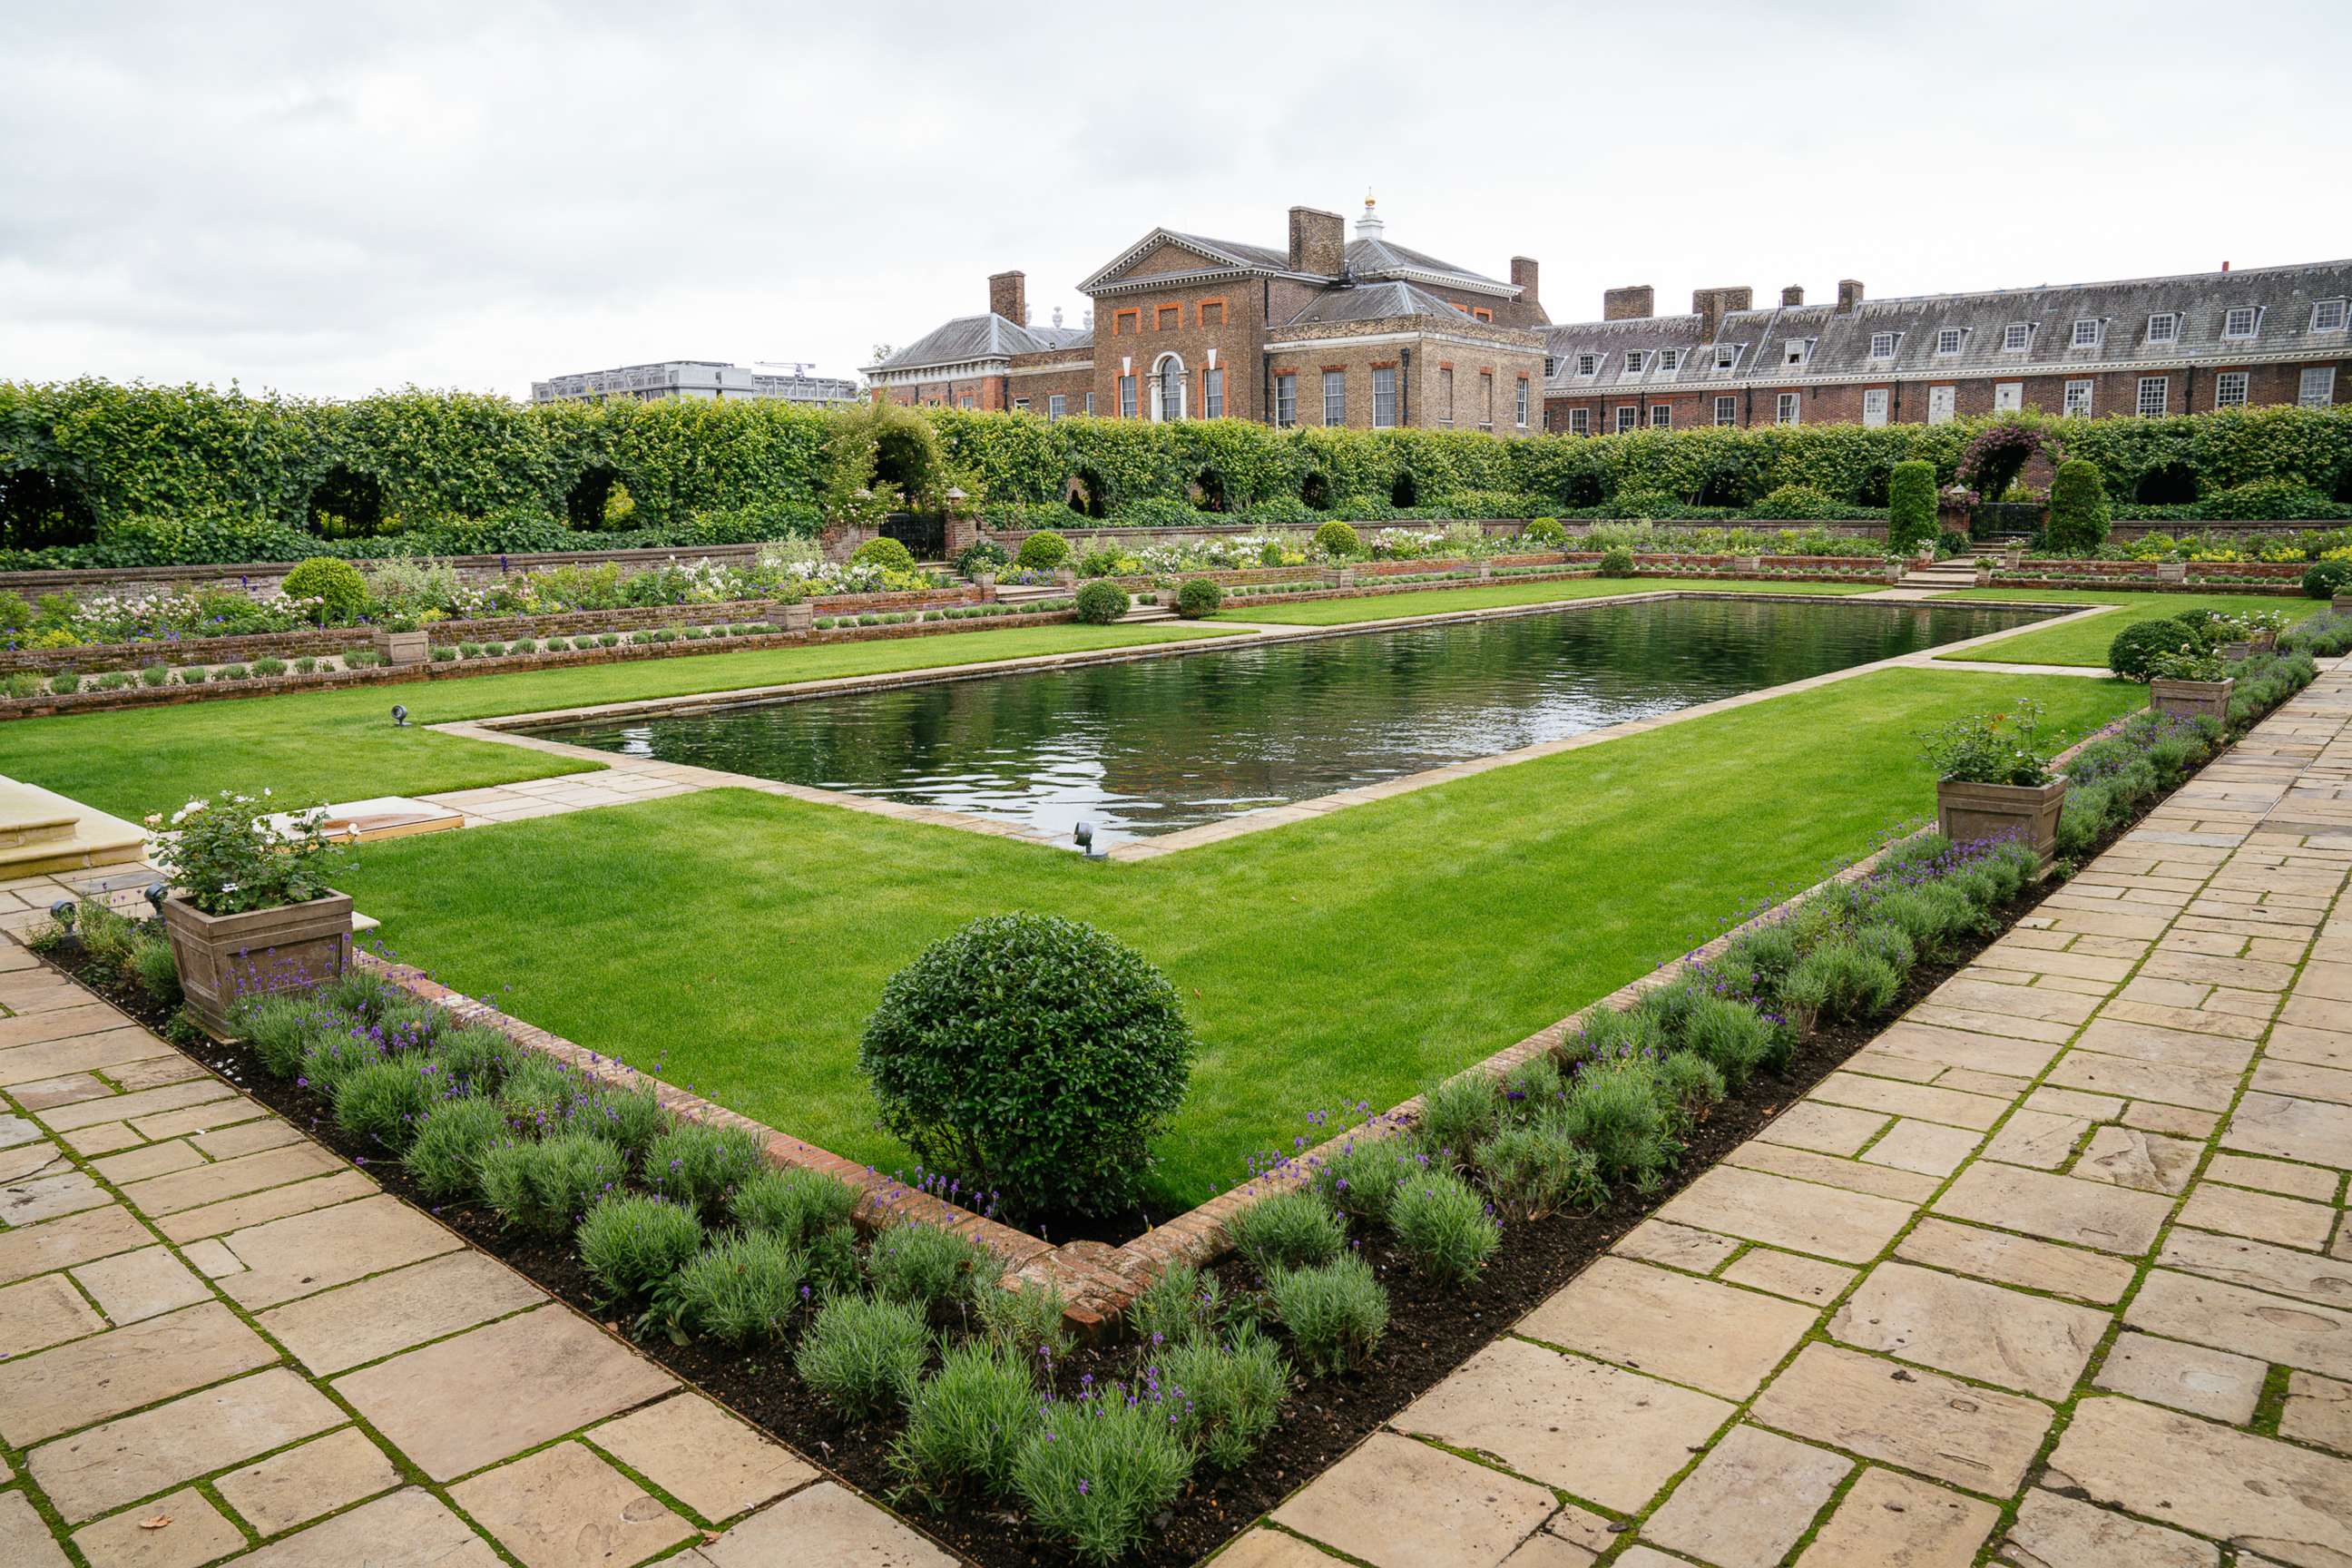 PHOTO: The newly redesigned Sunken Garden is pictured at Kensington Palace in London, supplied by Kensington Palace and released on July 1, 2021.